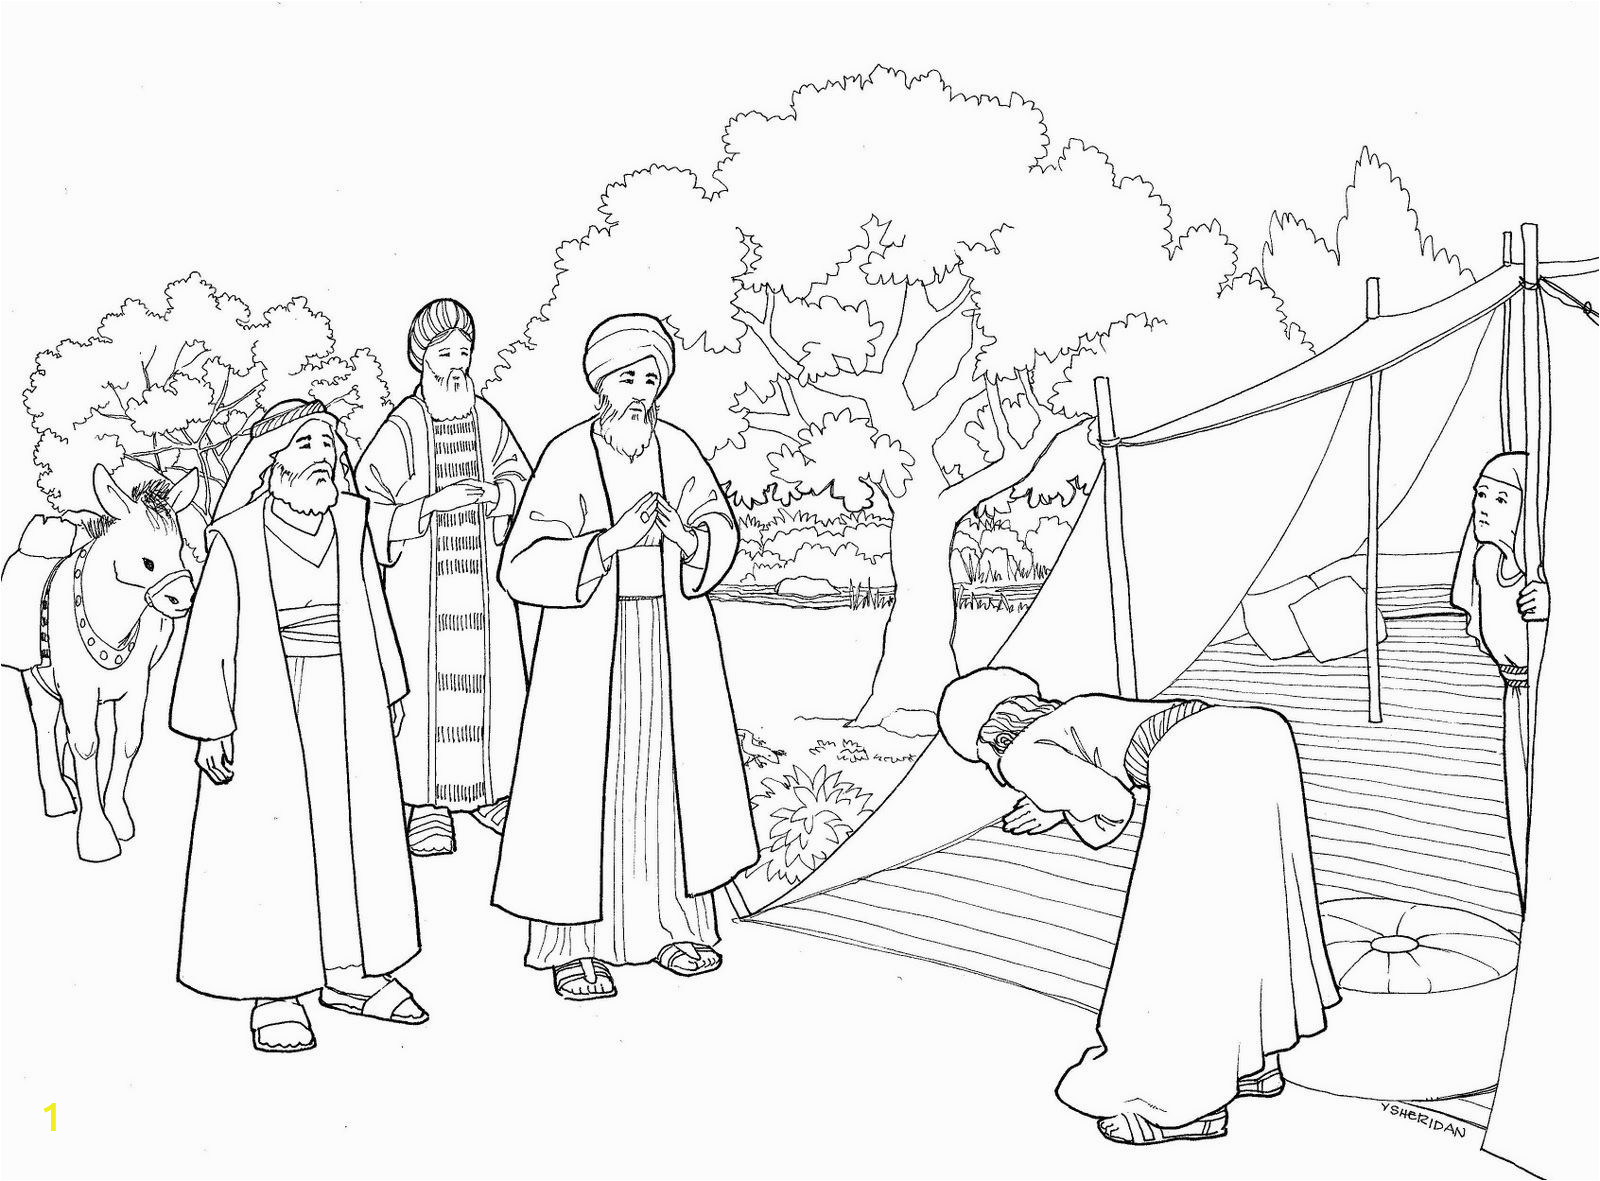 Free Coloring Pages for Zacchaeus Abraham and Three Visitors Coloring Page with Images